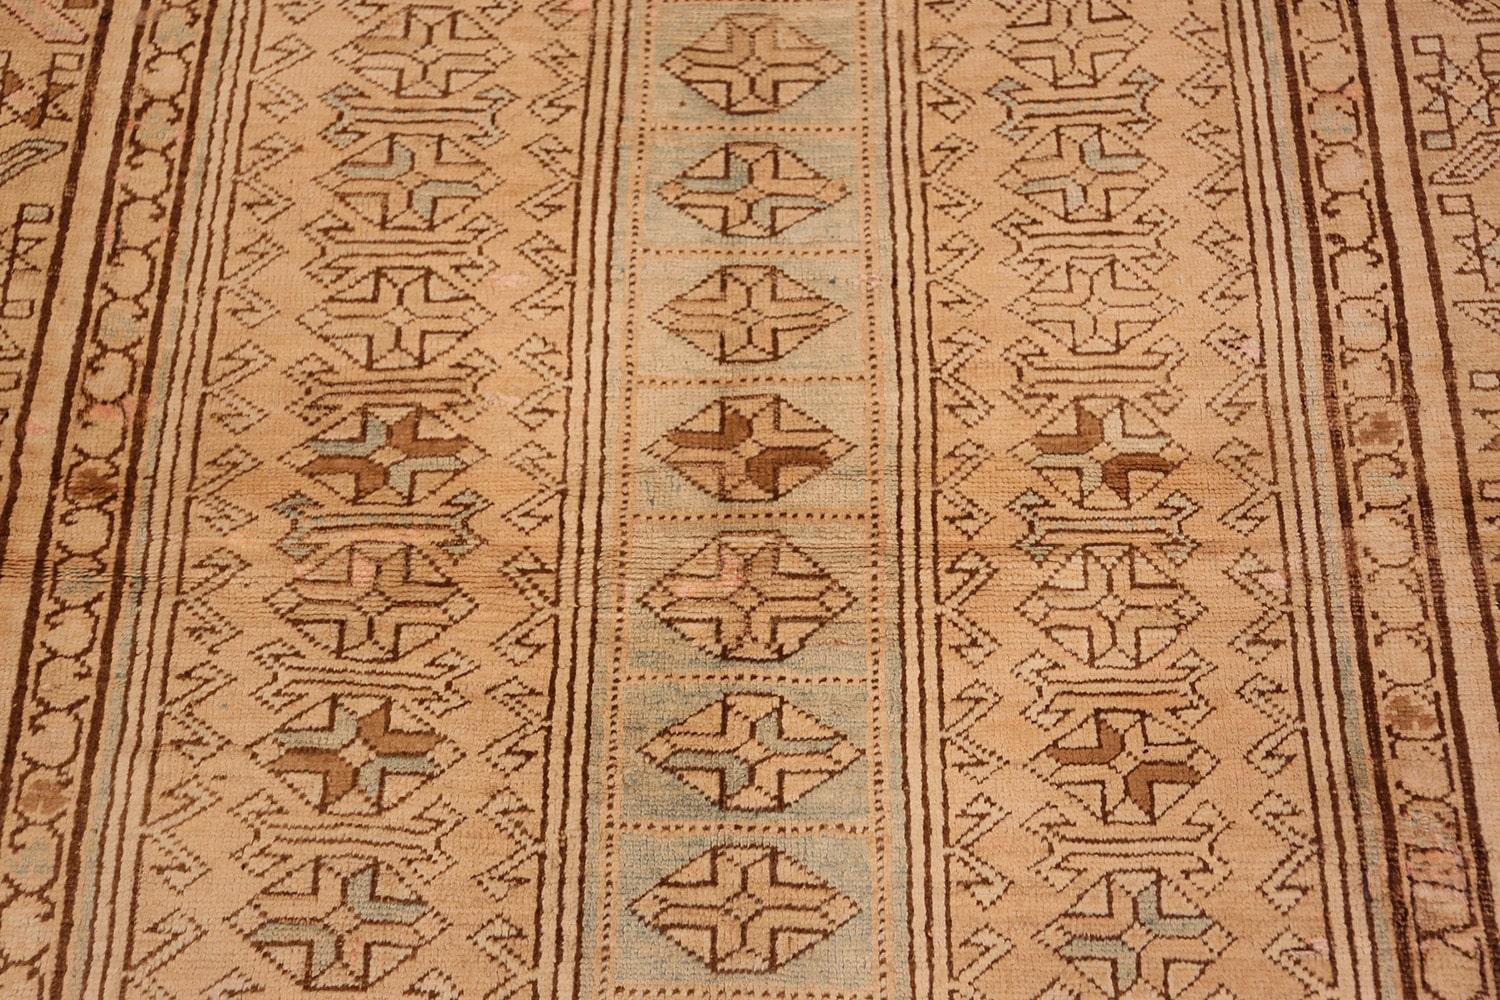 Vintage Caucasian Kazak rug, country of origin: Caucasus, date: circa 20th century - Size: 4 ft 3 in x 9 ft (1.3 m x 2.74 m). The creamy body of this vintage Caucasian rug is decorated with three banners aligning along the vertical, the outer two